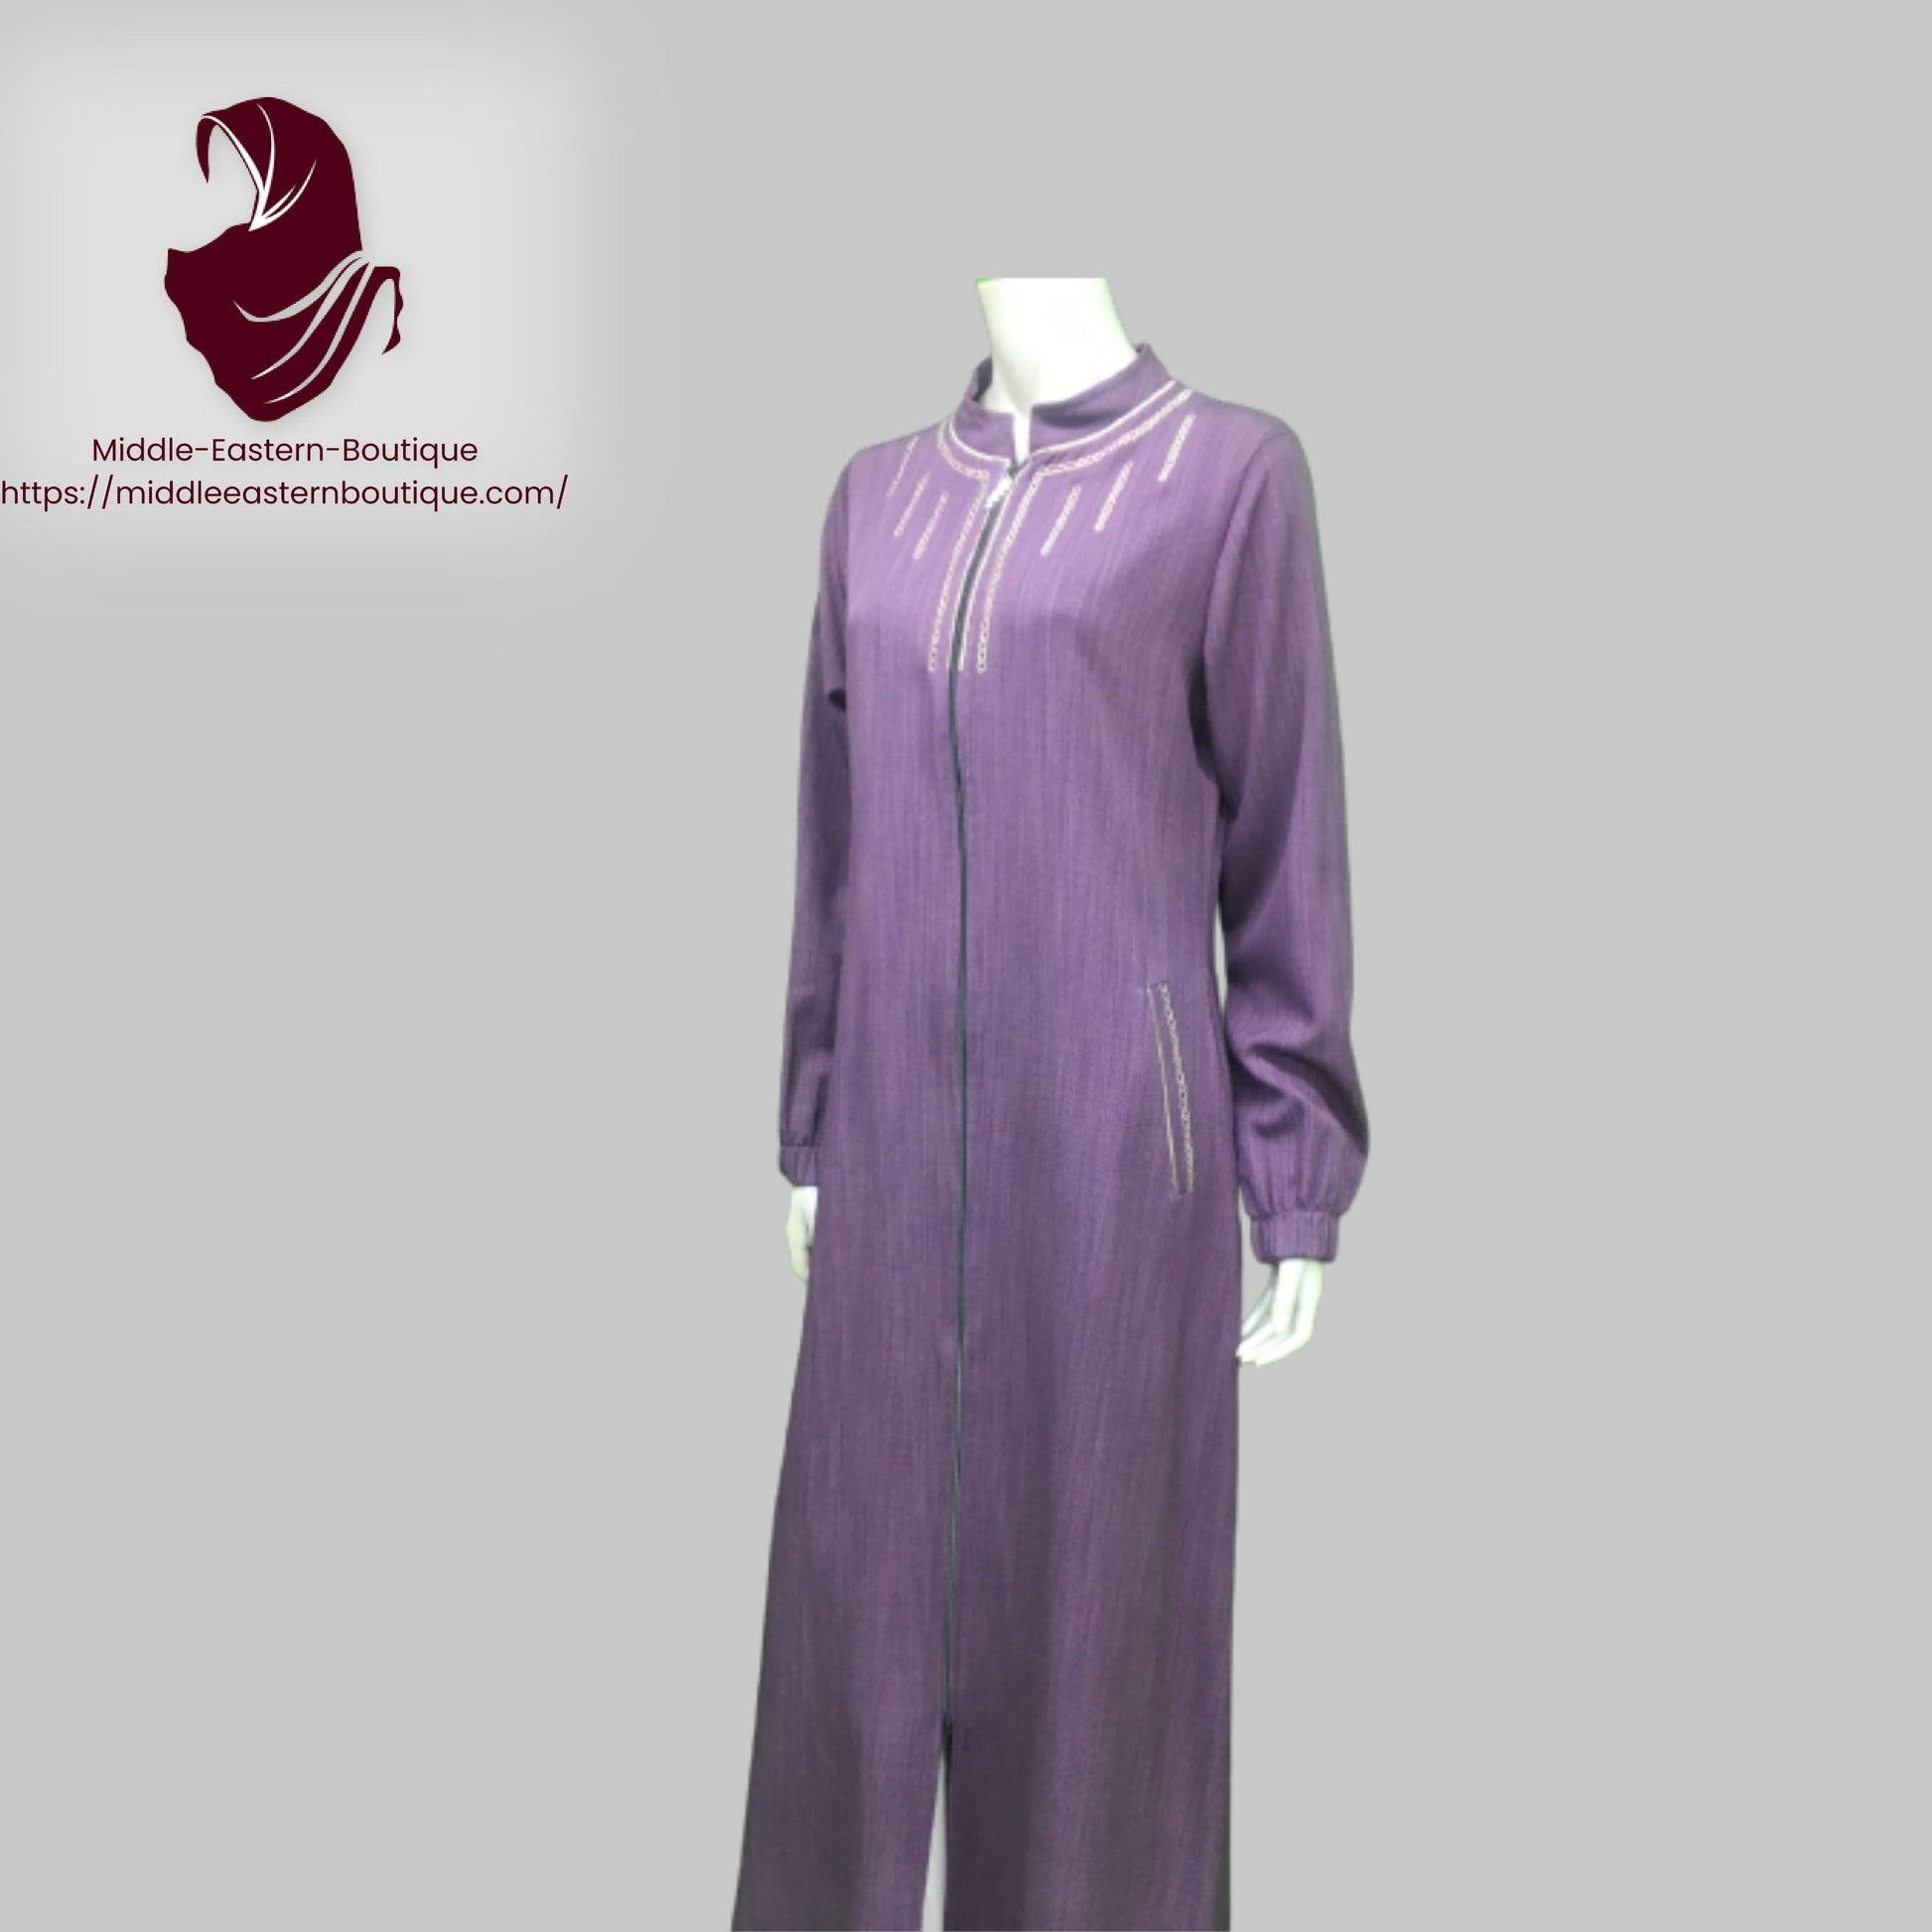 Jilbab zipper, abaya, with white lines extending around the neck and  with buckets,  Very Comfortable. Middle Eastern Boutique